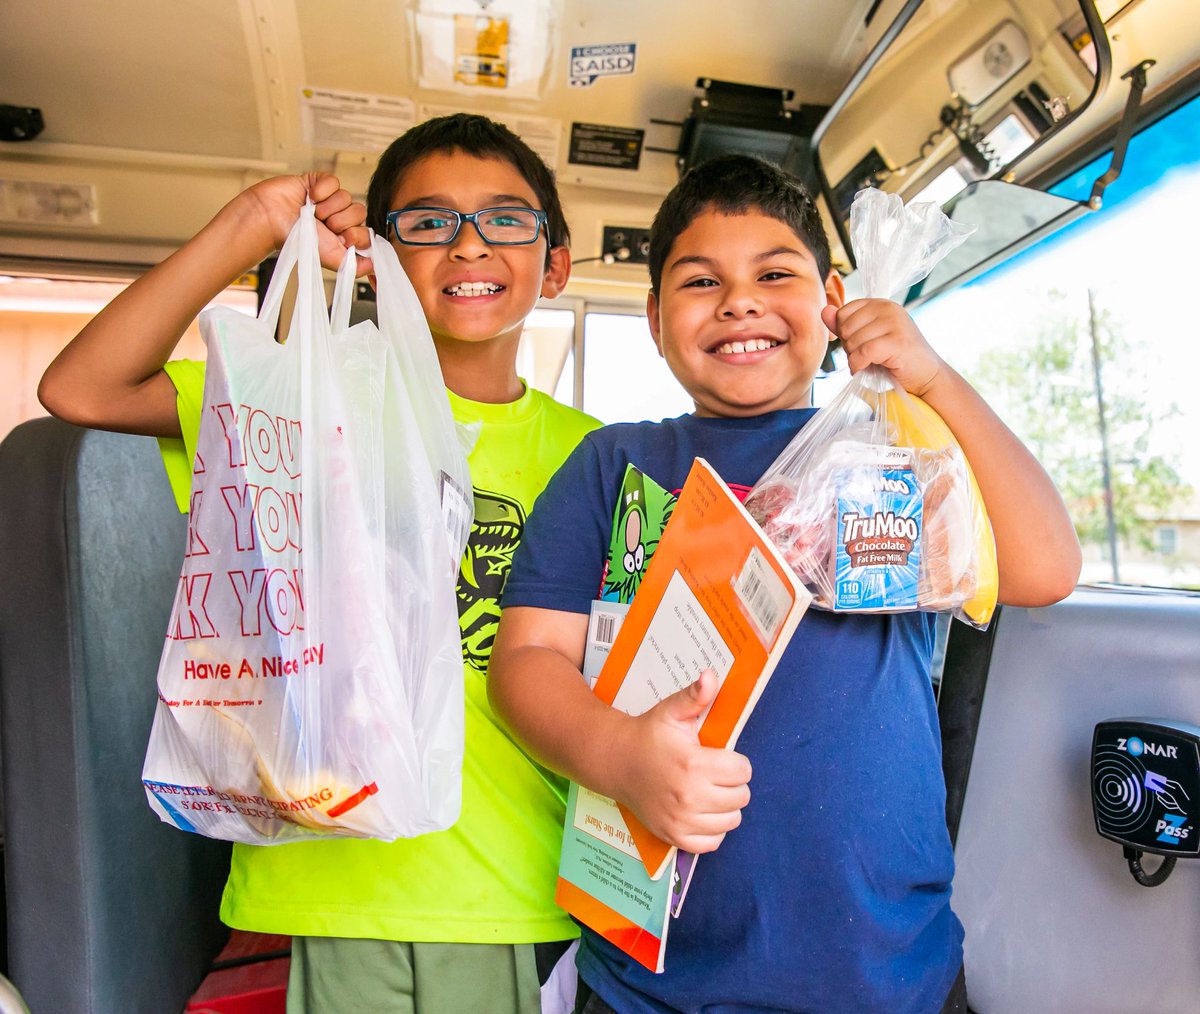 The #SummerEBT program provides grocery benefits to school-aged children throughout the summer. Benefits are automatic for many, but some families may need to apply. Check your qualification status at bit.ly/3URvObF 🍎🥦 #NoKidHungry #EndSummerHunger #SummerMealsForKids